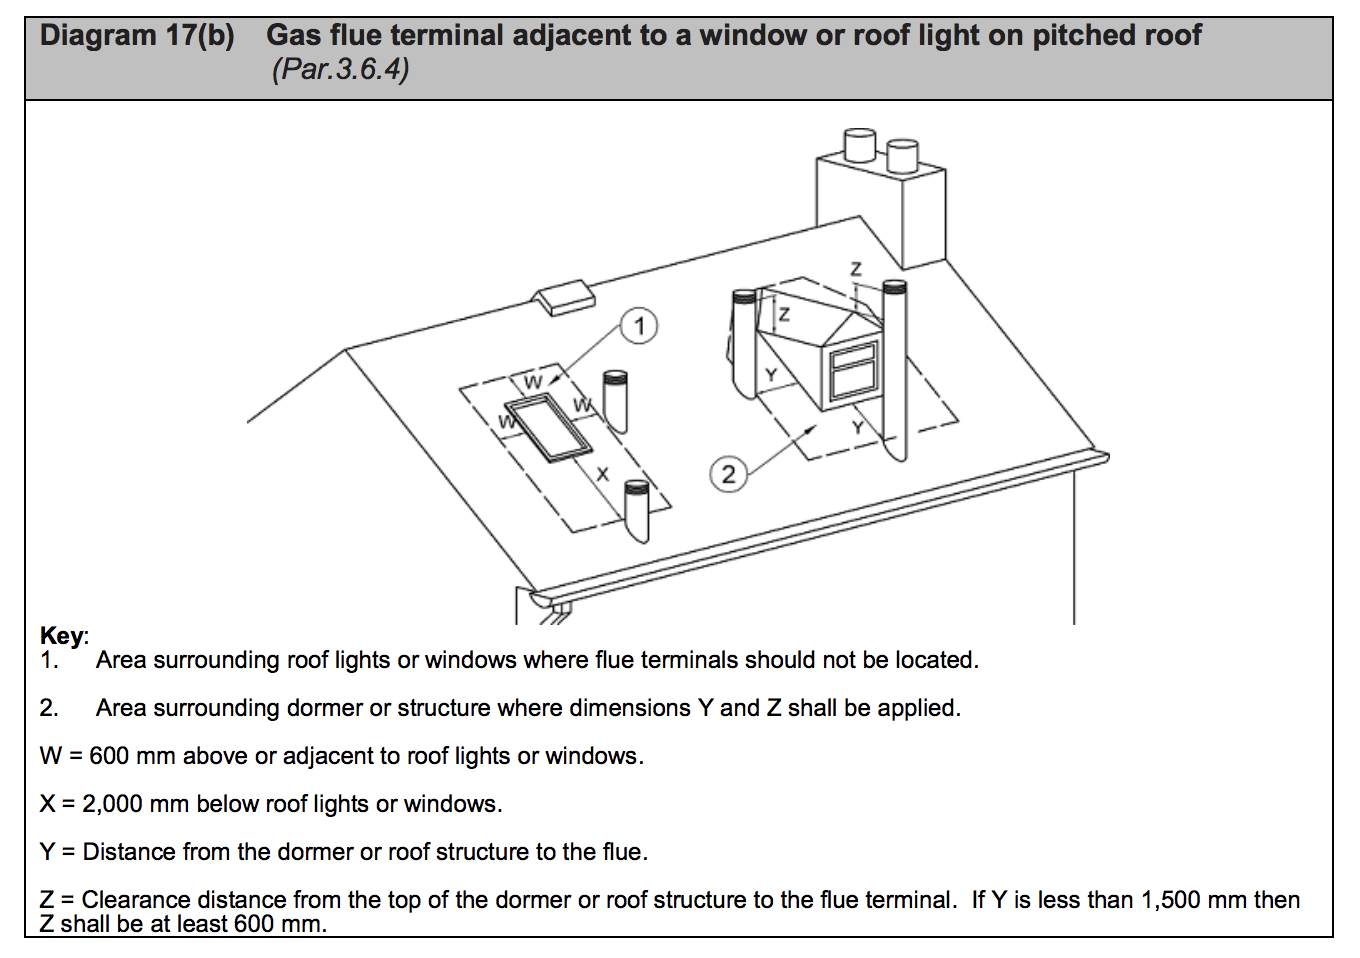 Diagram HJ17b - Gas flue terminal adjacent to a window or roof light on pitched roof - Extract from TGD J